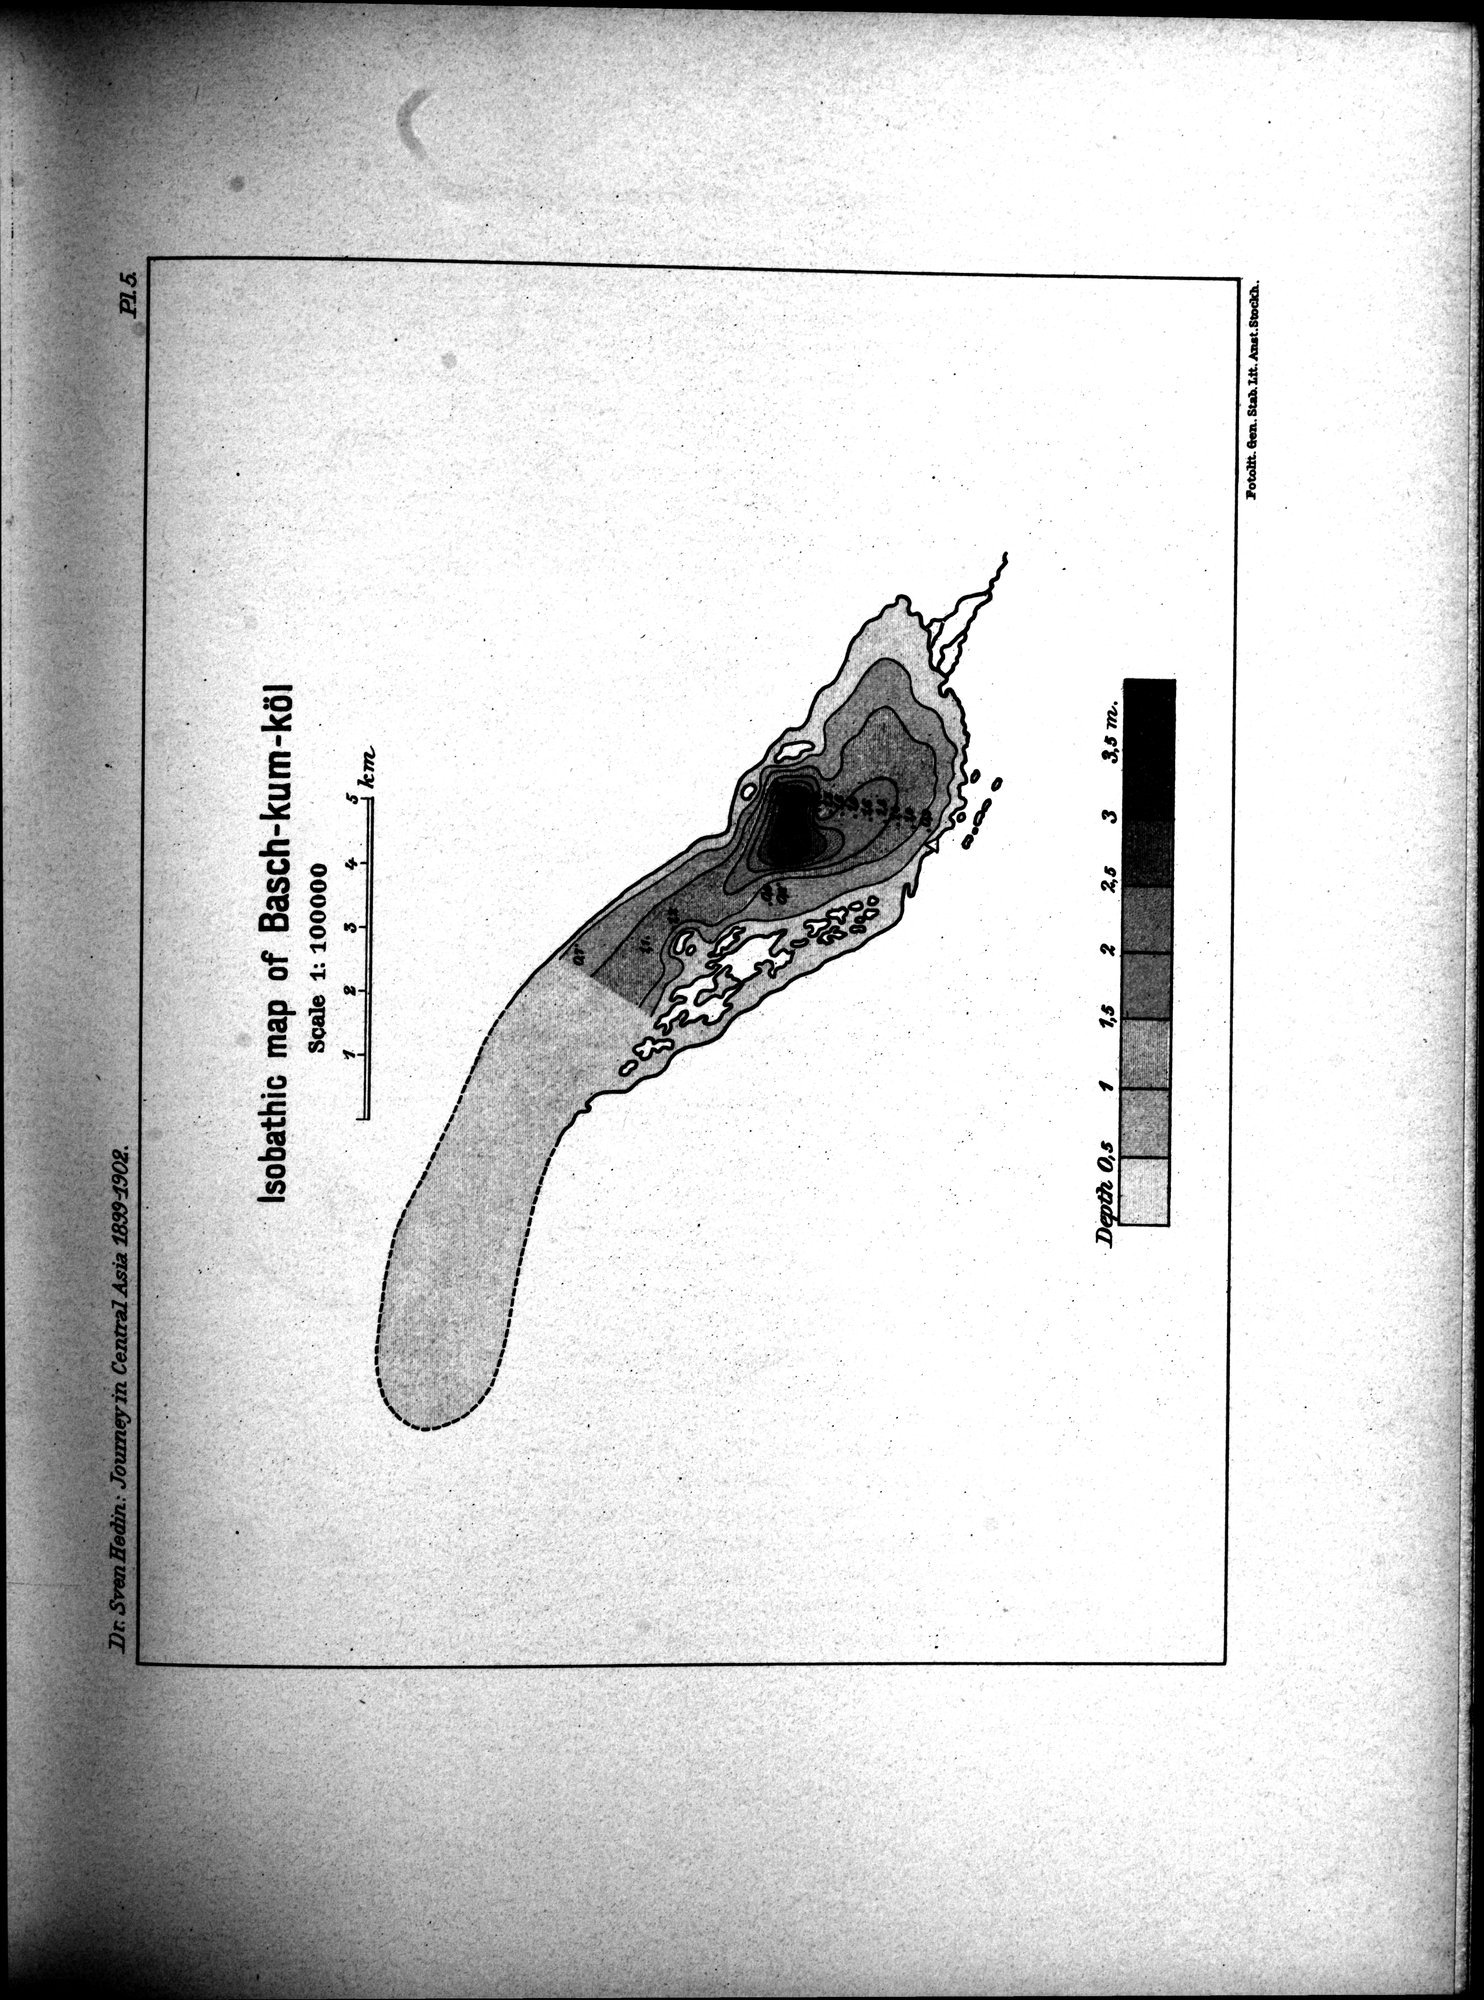 Scientific Results of a Journey in Central Asia, 1899-1902 : vol.3 / 83 ページ（白黒高解像度画像）